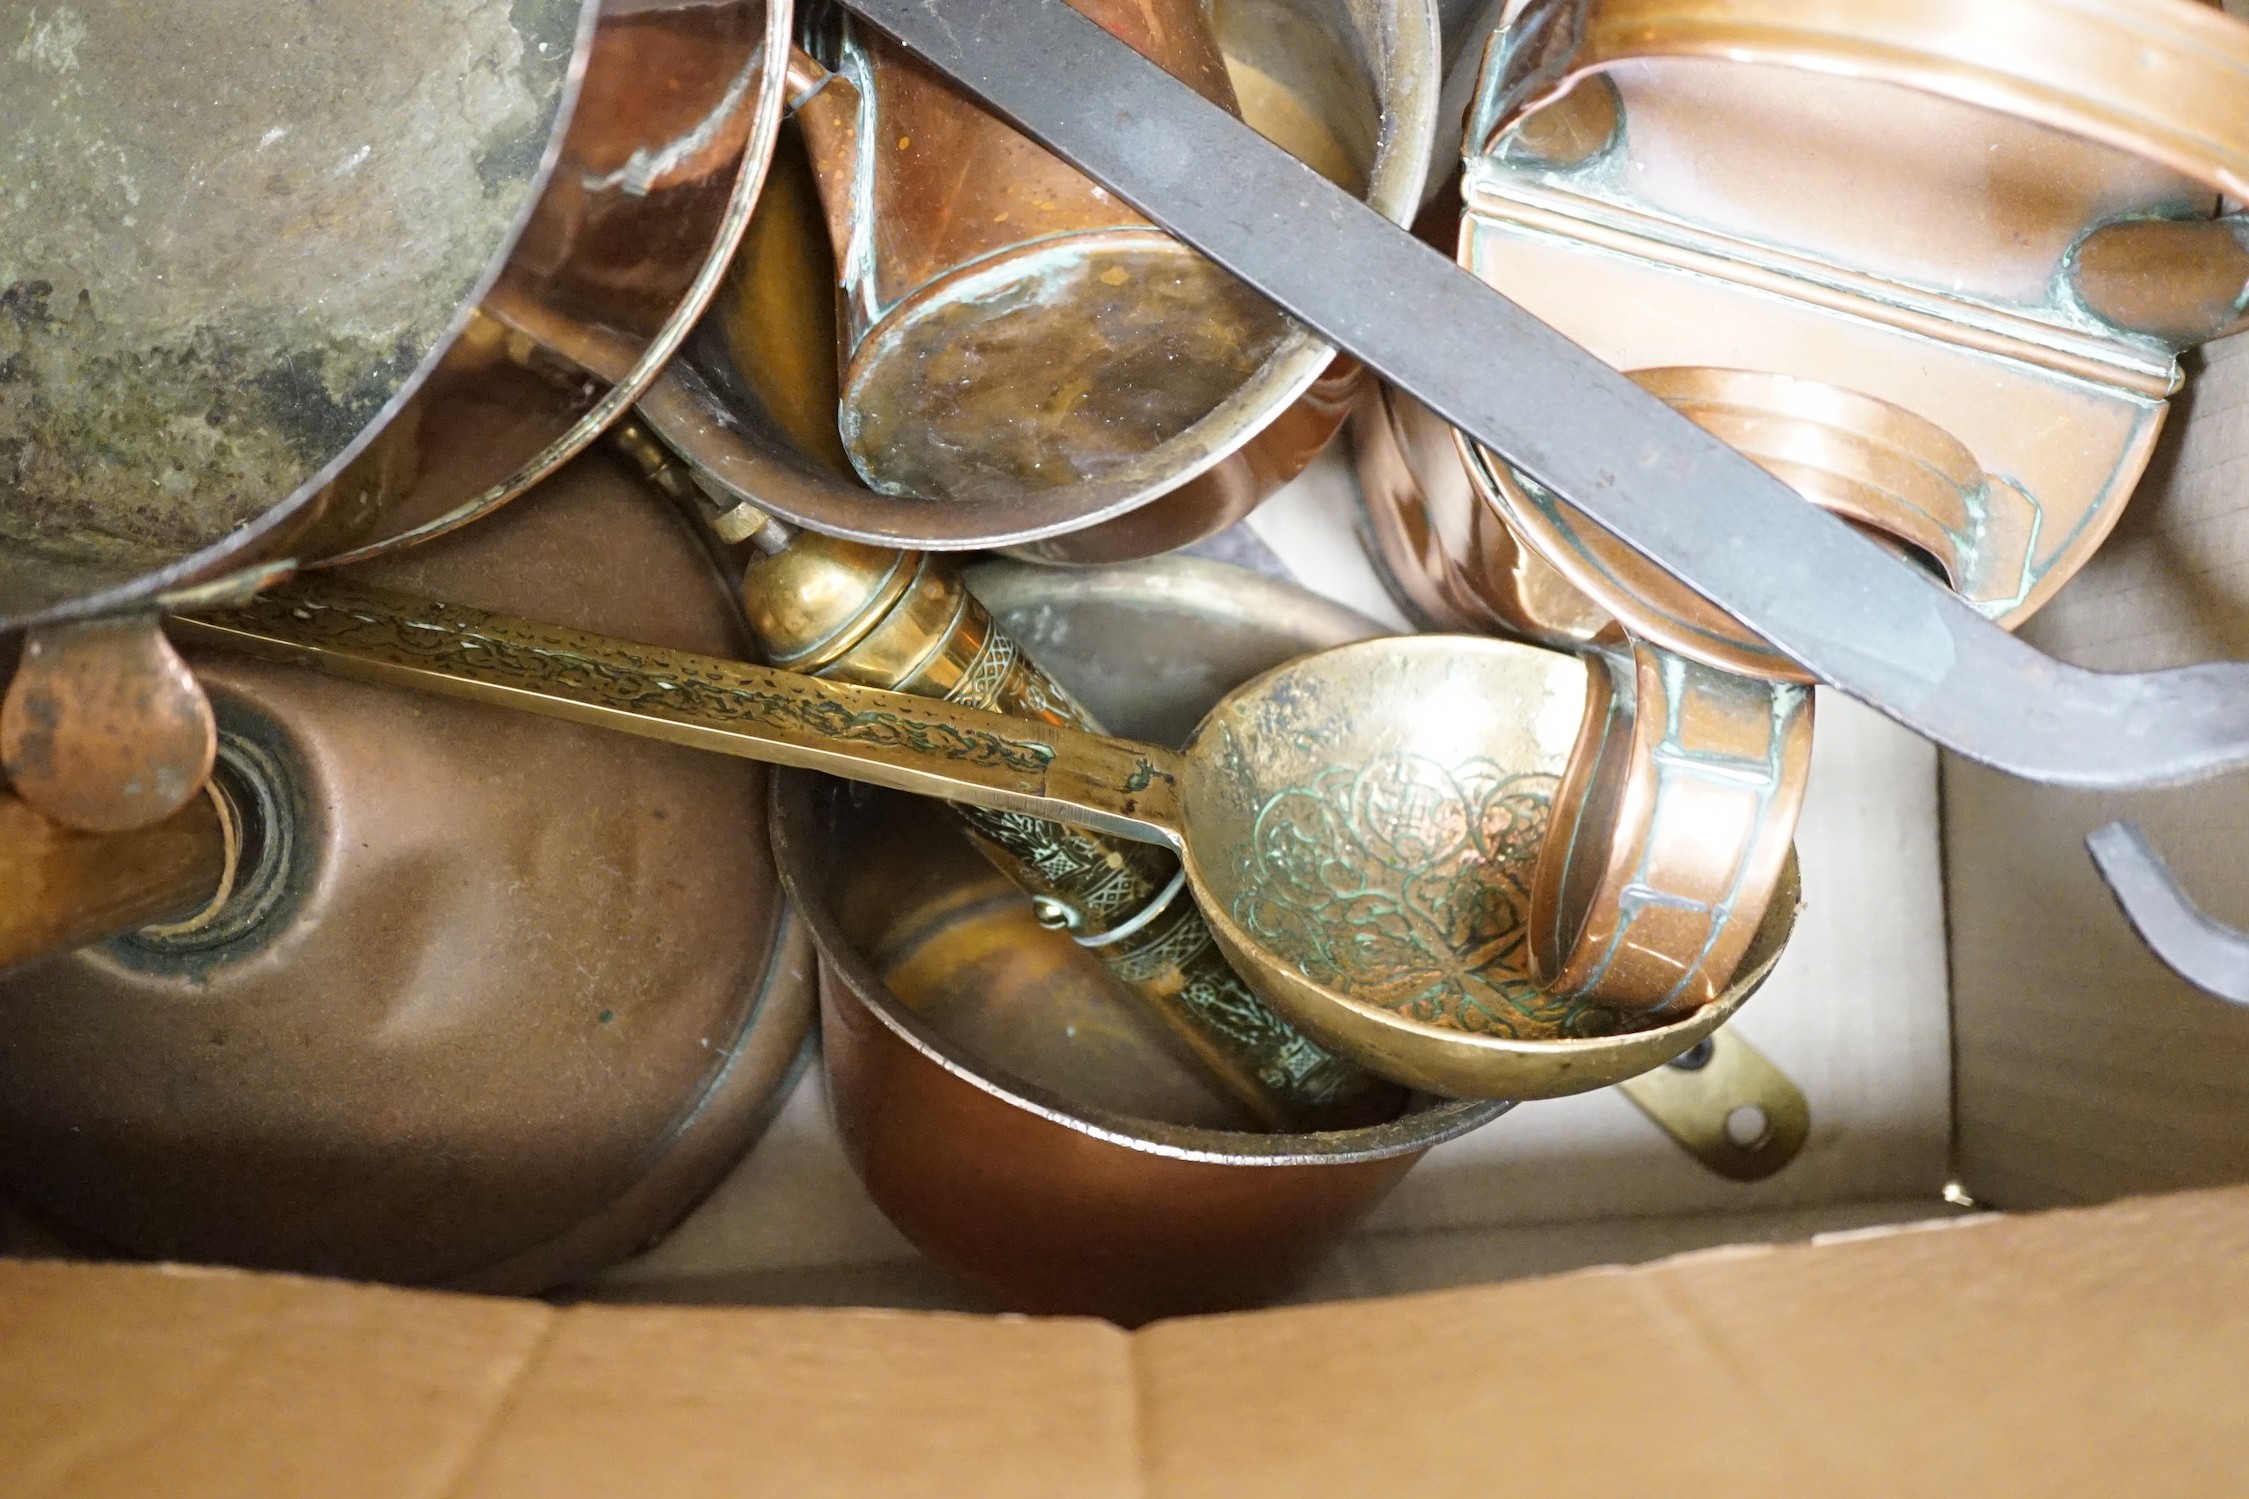 A quantity of various copper and brass to include jelly moulds, trivets, watering cans etc. - Image 3 of 5